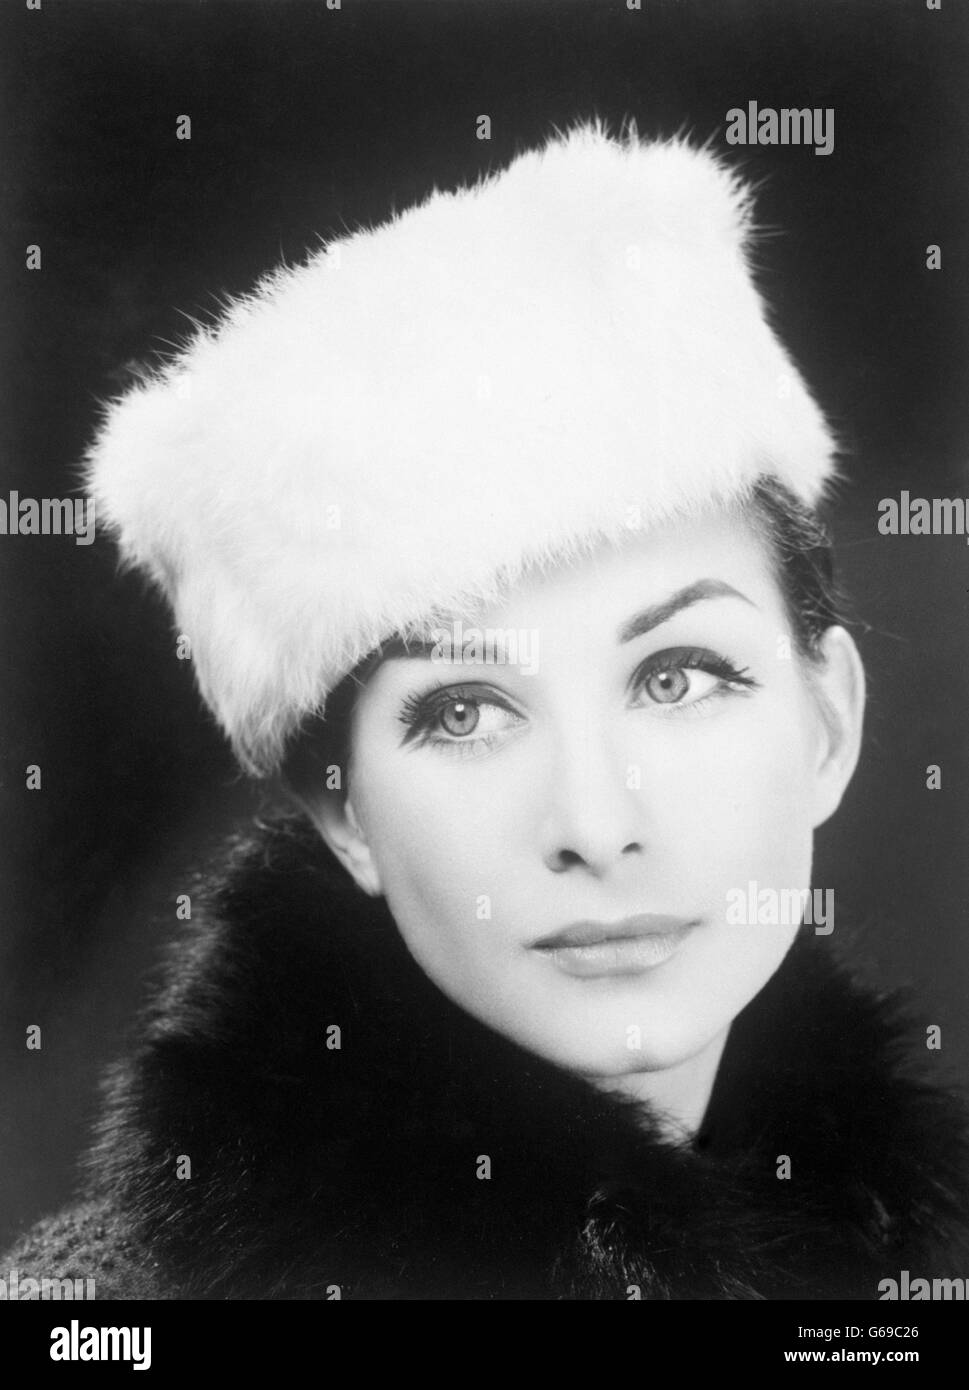 A model wears a white fur pillbox hat, named the Snowqueen. The crown of the hat is topped with white velvet. Stock Photo